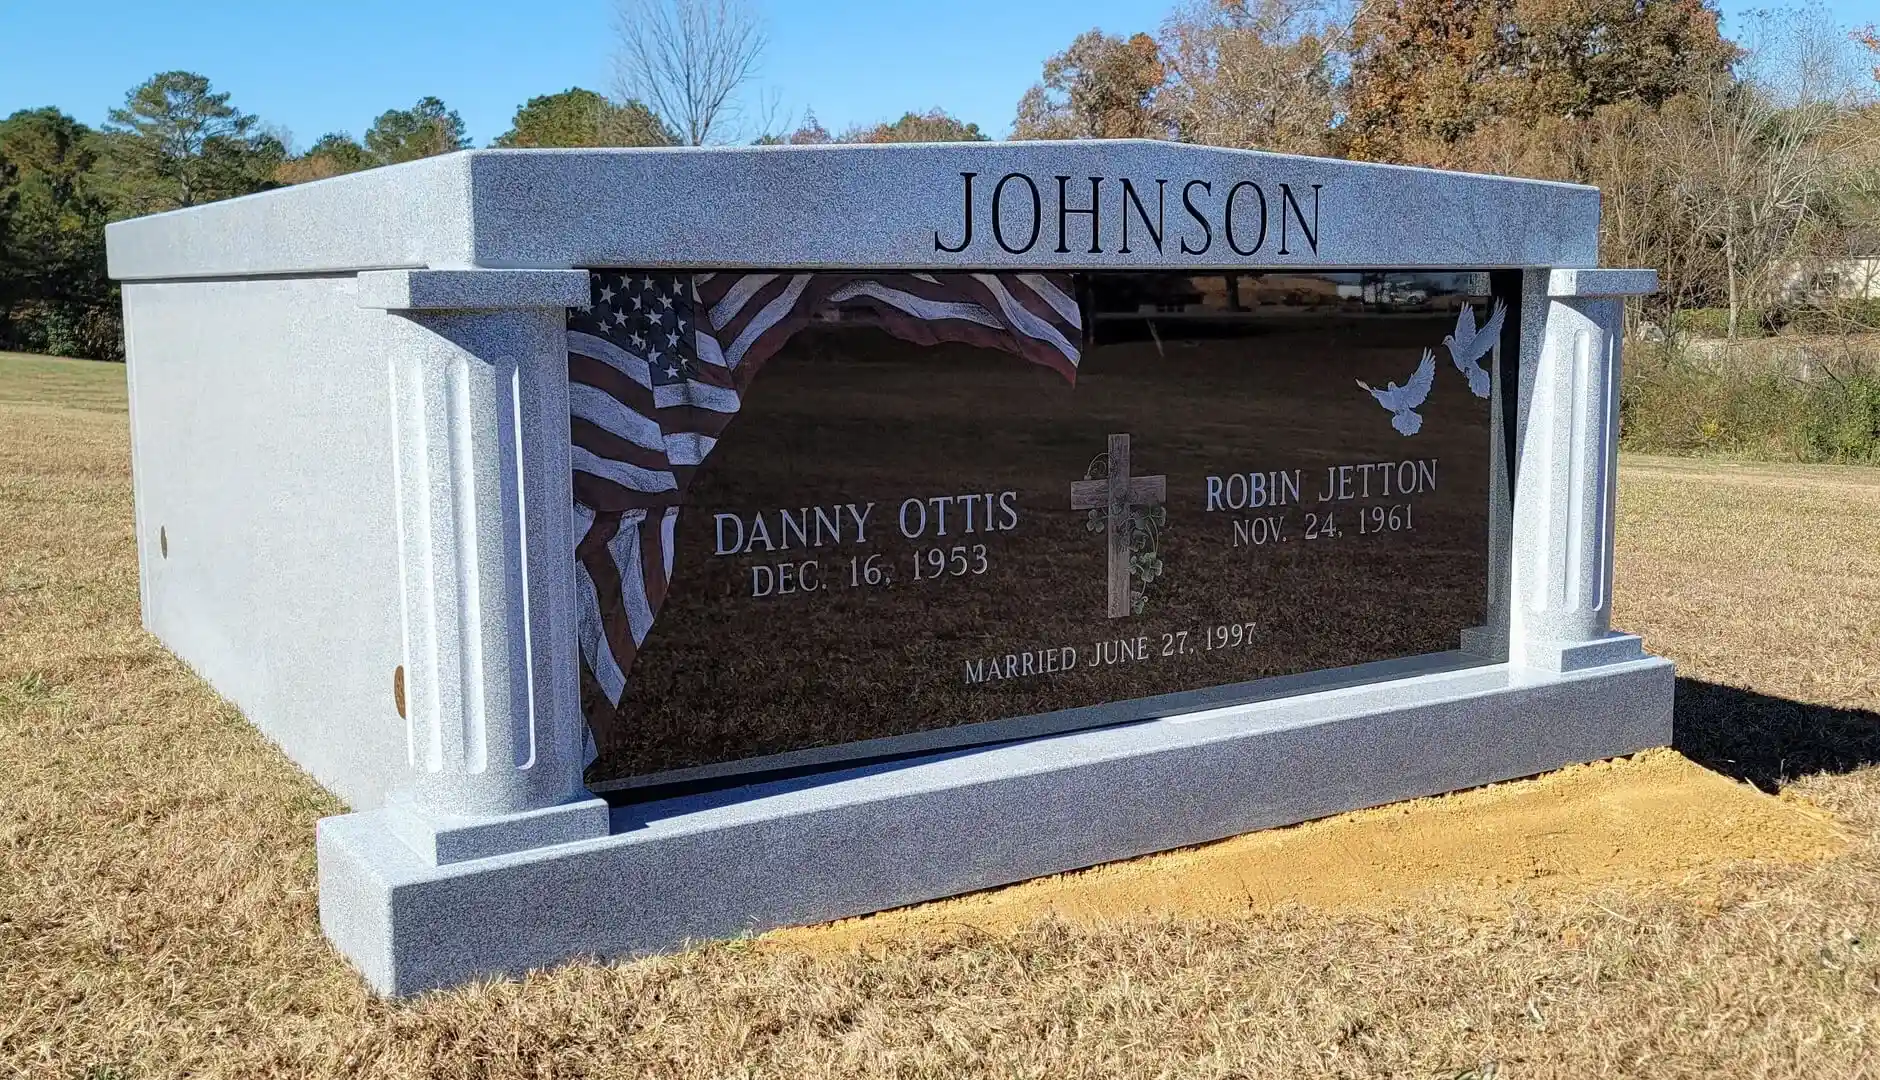 A memorial slab with the name Johnson and illustration of American flag